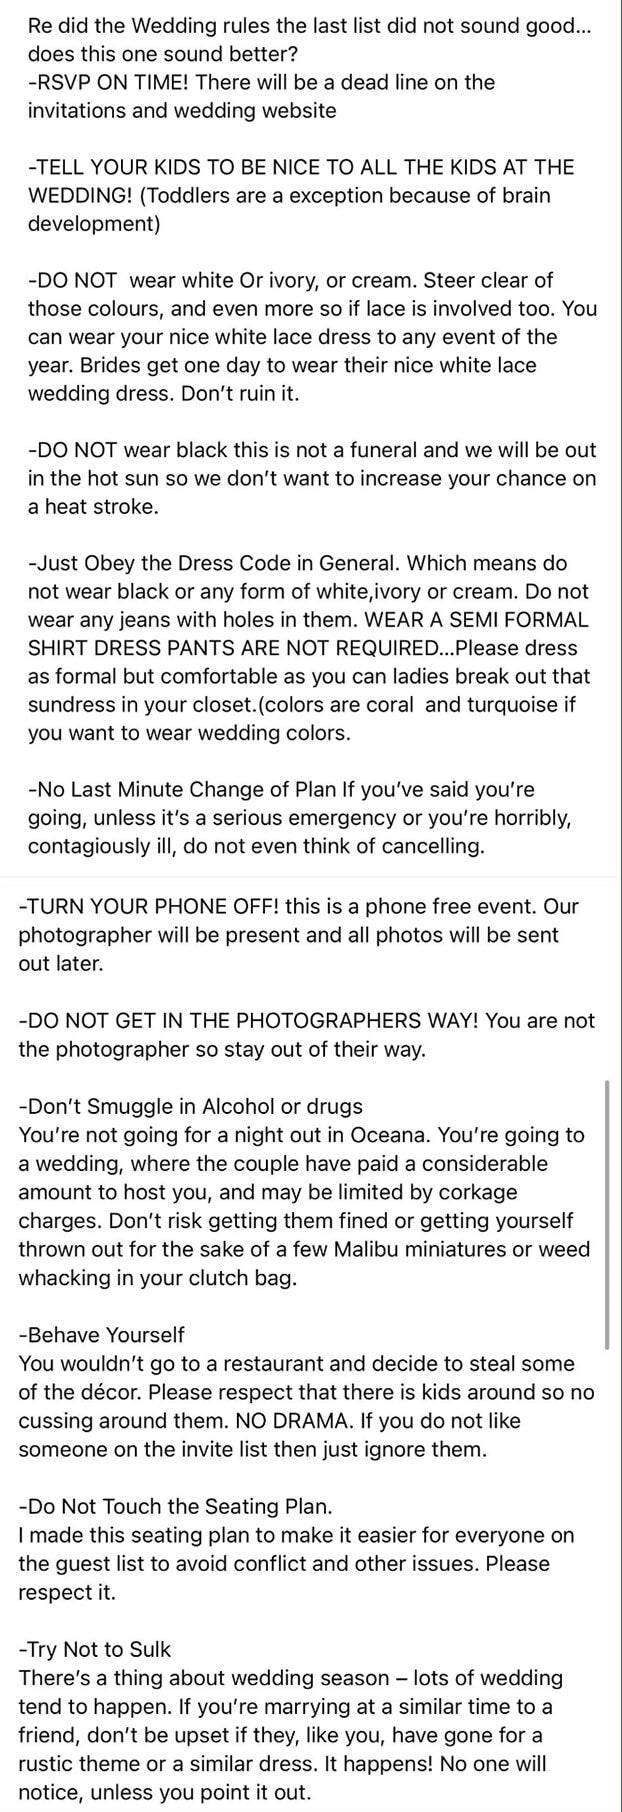 a long list of rules like don&#x27;t get in the photographers way, don&#x27;t sulk, tell your kids to be nice